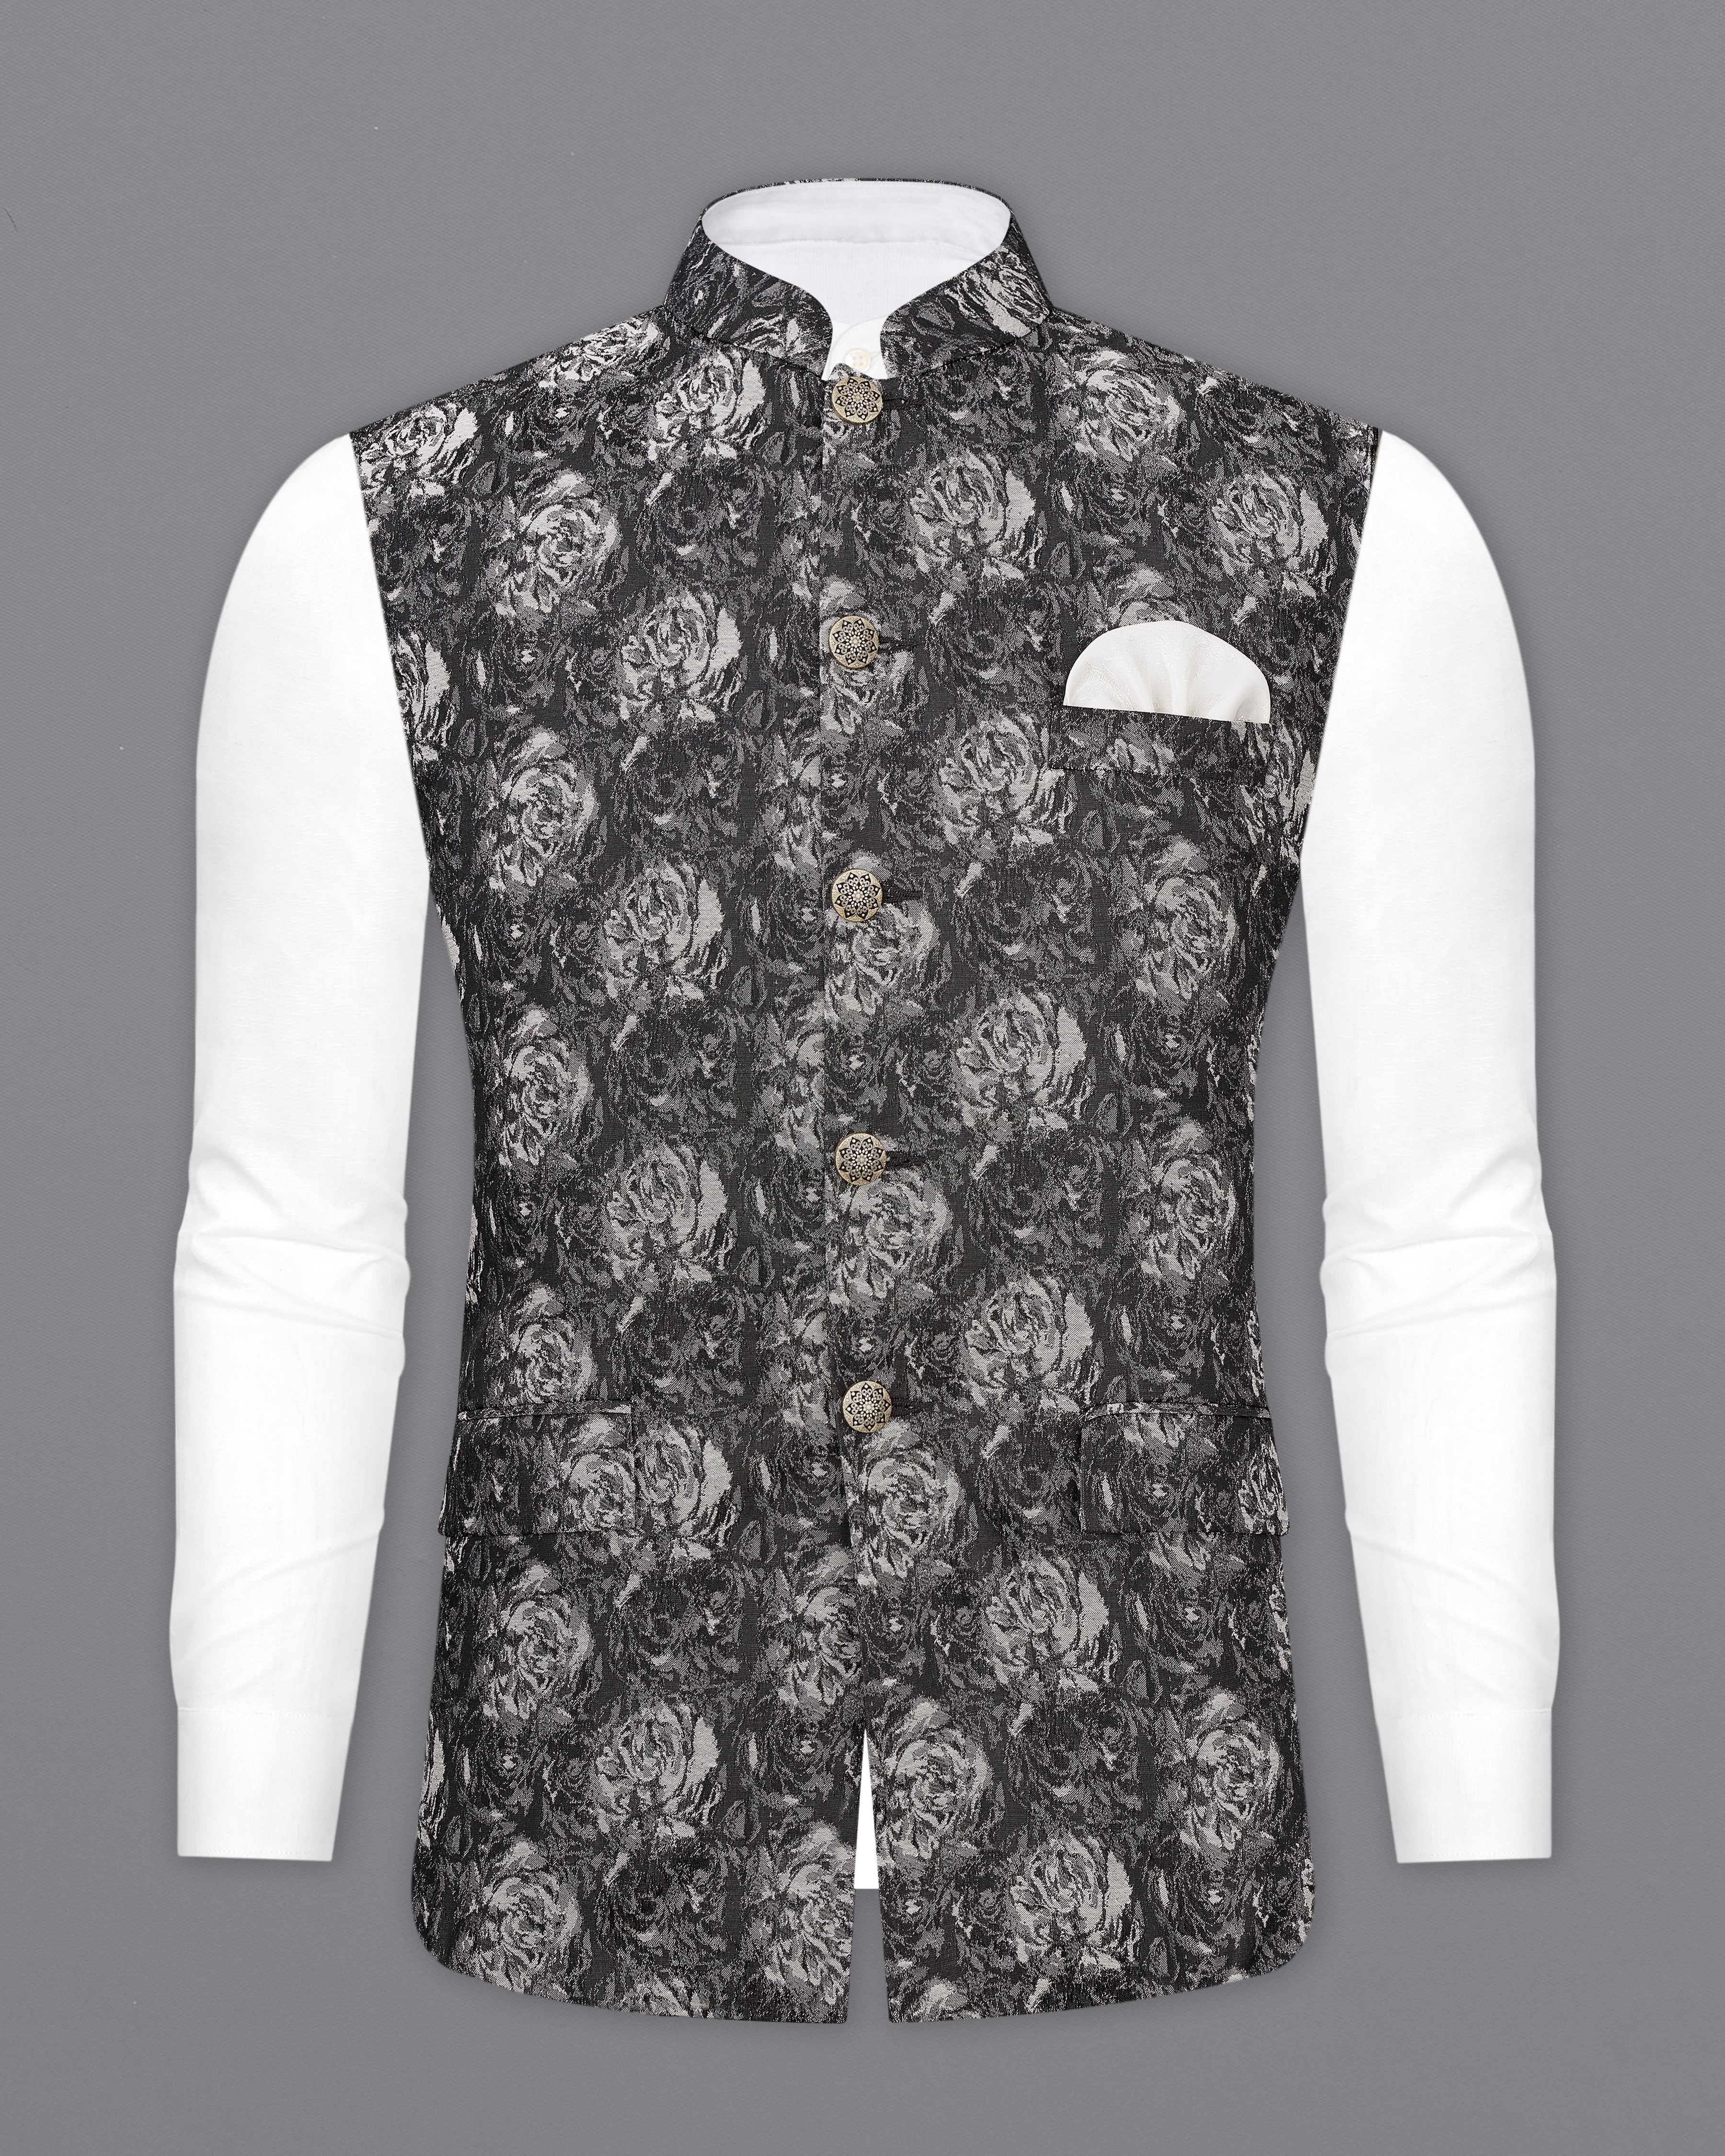 Charcoal Gray with Blue Textured Nehru Jacket WC2337-36, WC2337-38, WC2337-40, WC2337-42, WC2337-44, WC2337-46, WC2337-48, WC2337-50, WC2337-52, WC2337-54, WC2337-56, WC2337-58, WC2337-60